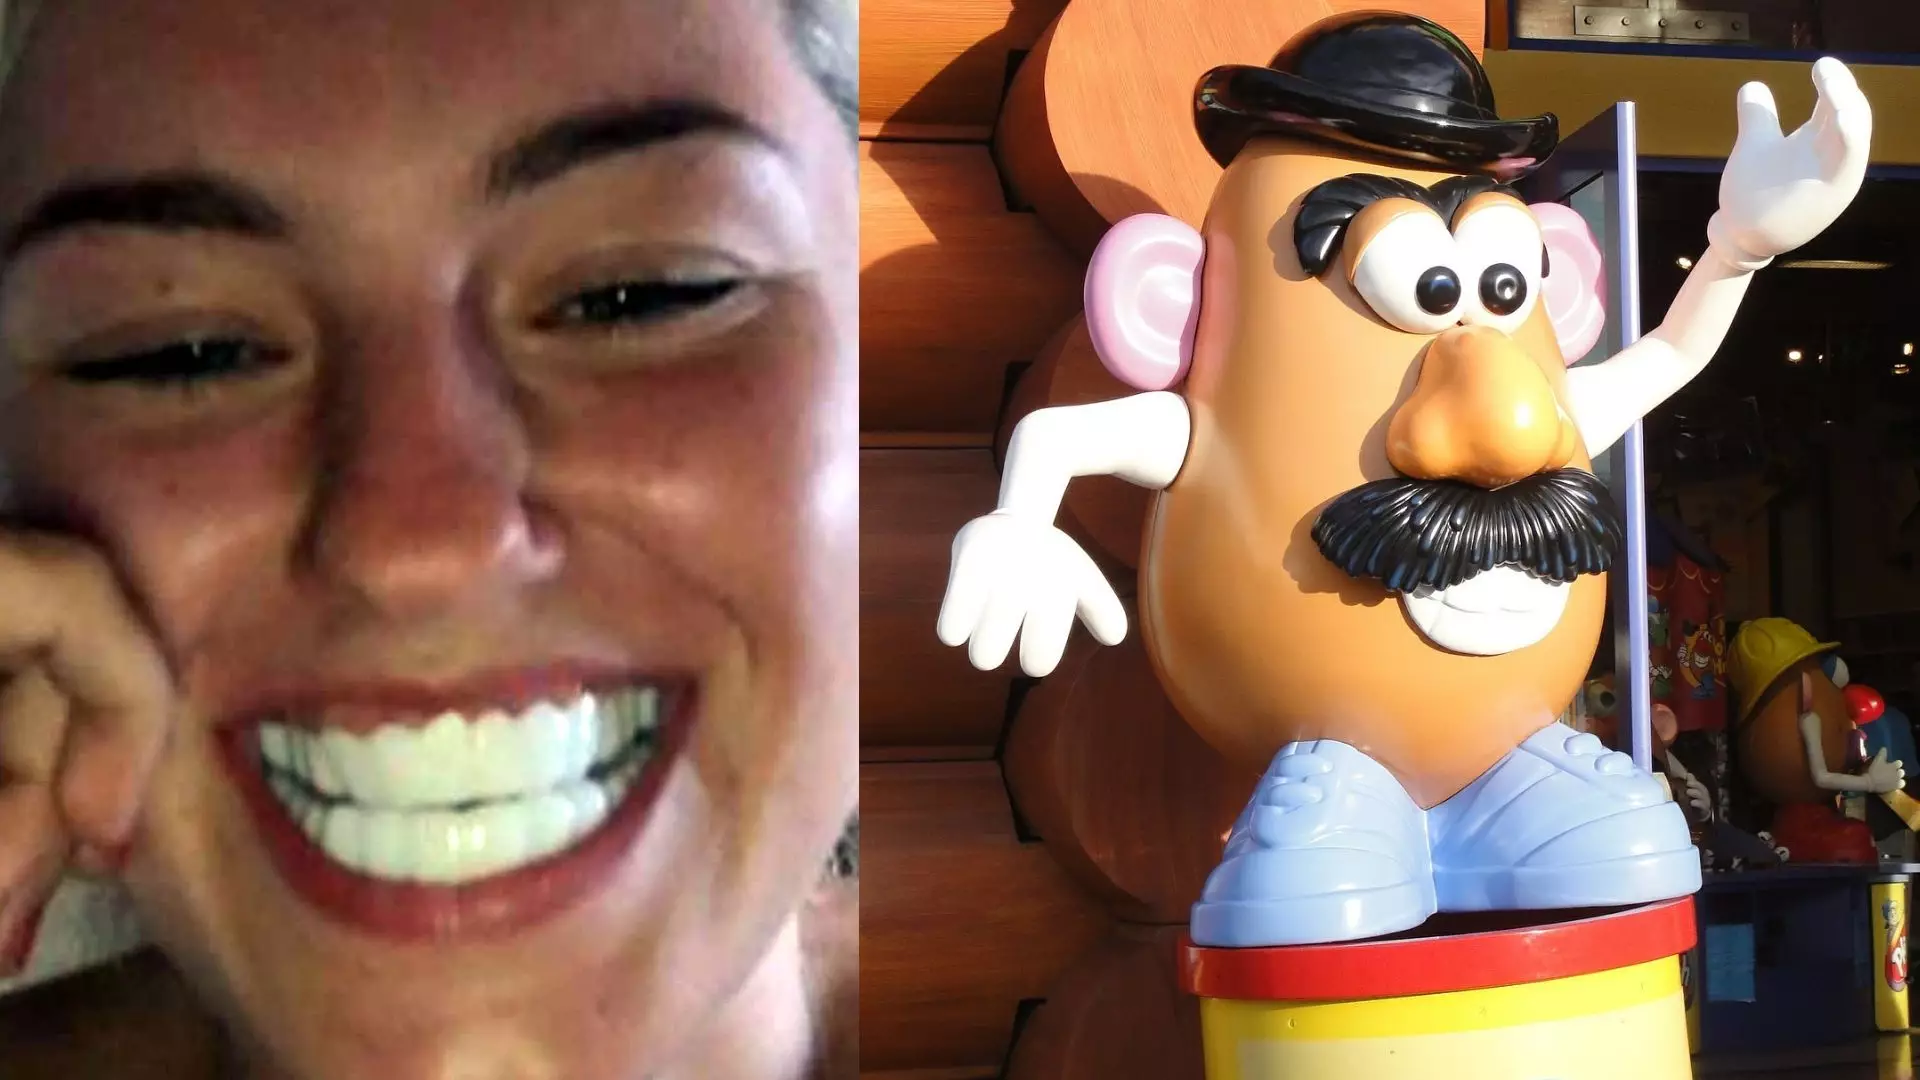 Woman Is Left ‘Looking Like Mr Potato Head’ After Buying Clip-on Veneers For £40